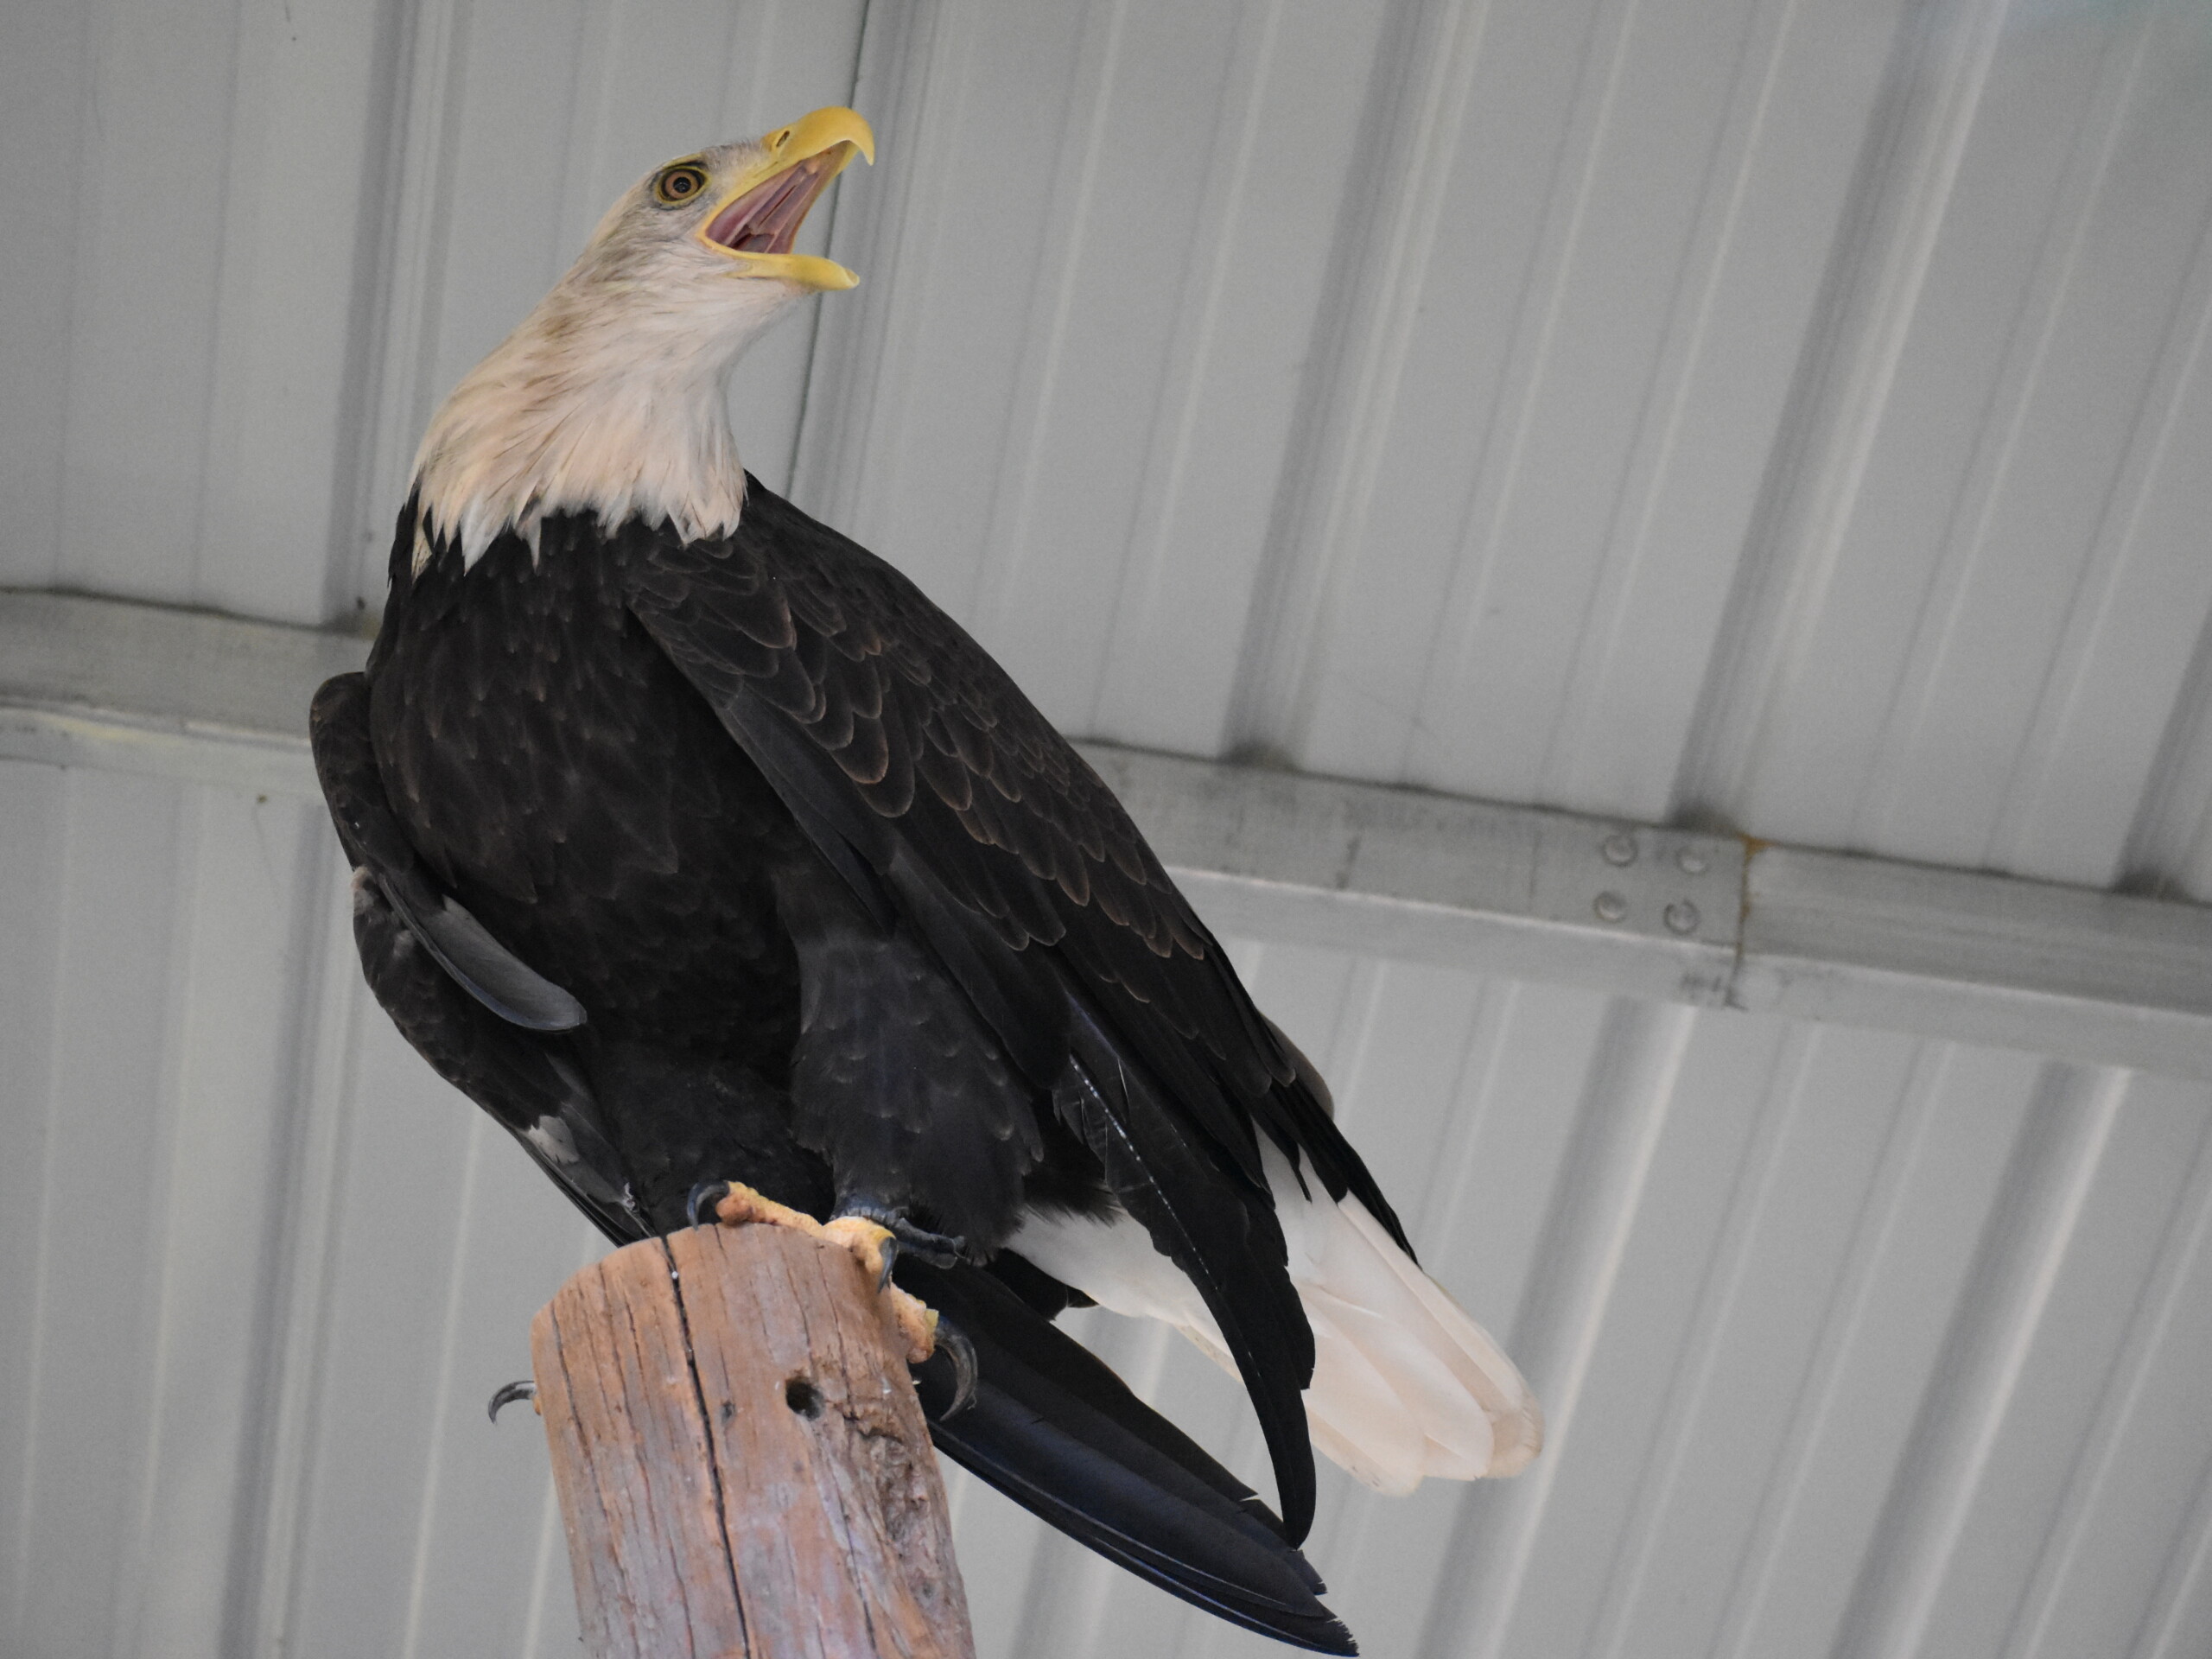 Hannah, bald eagle, cawing from her perch